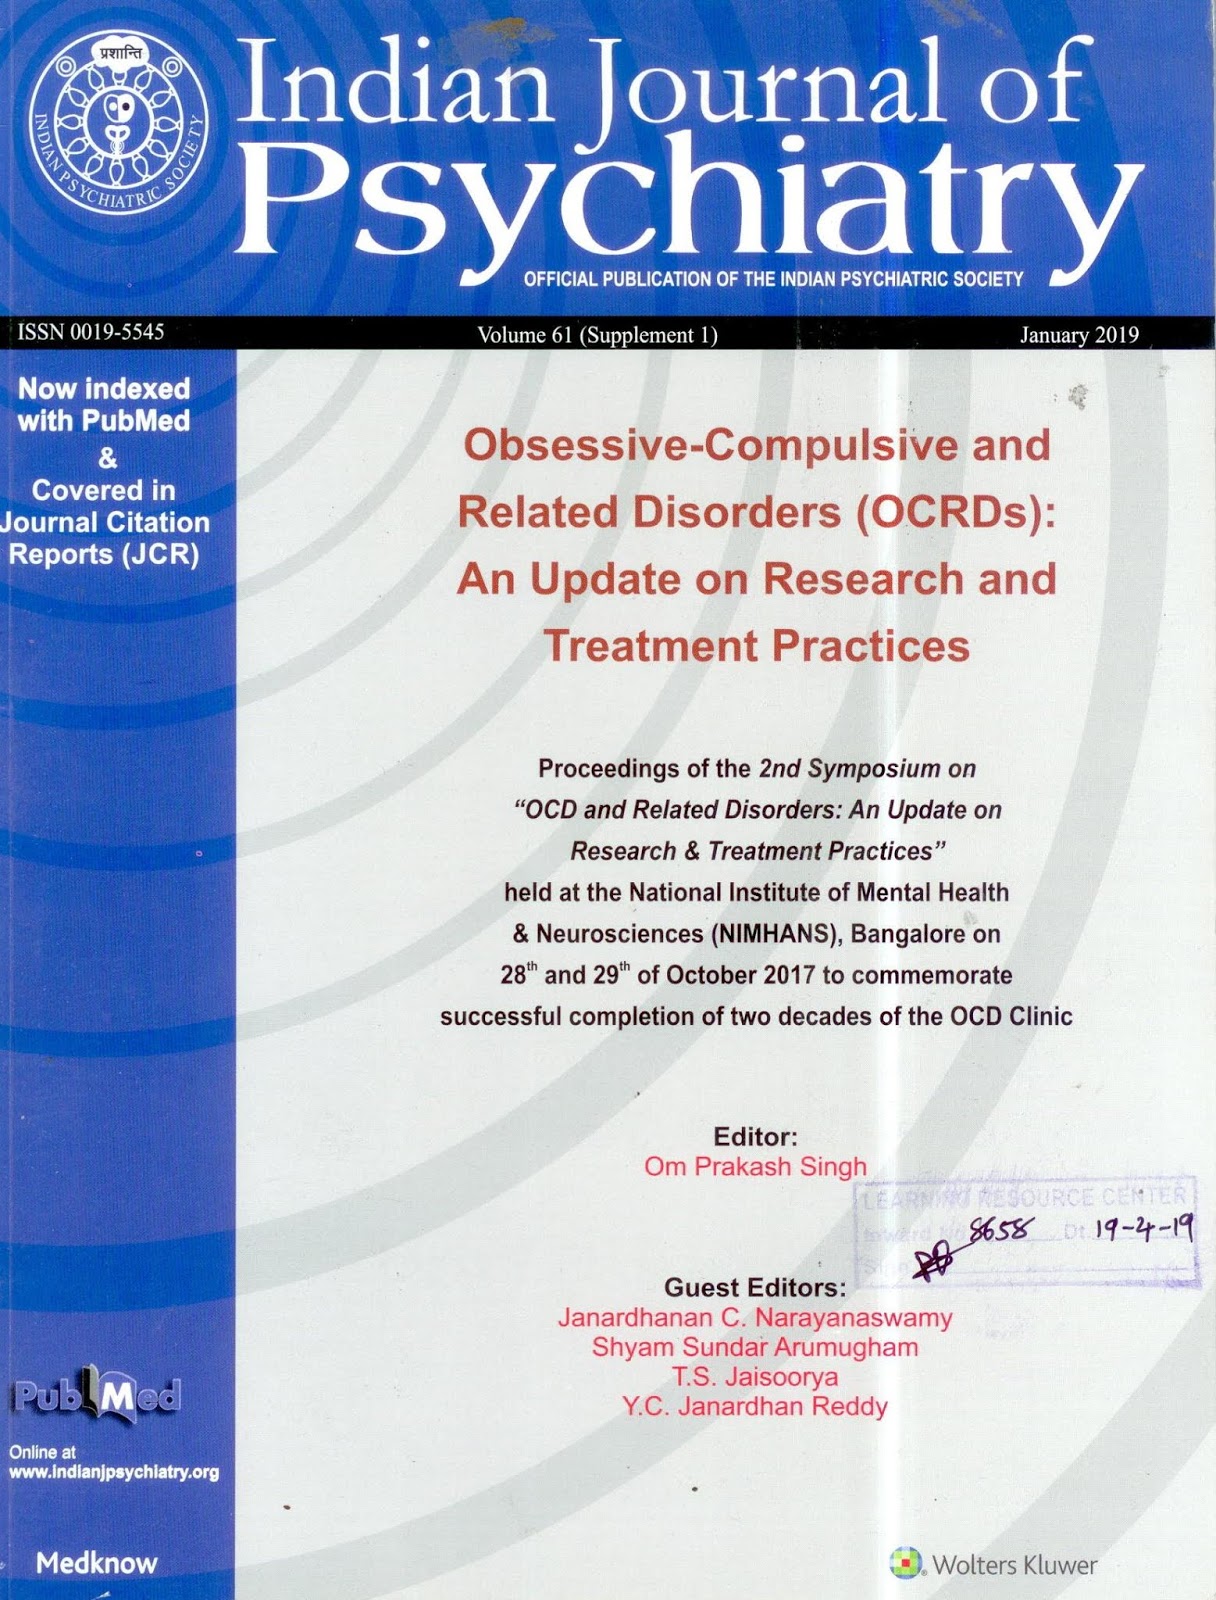 http://www.indianjpsychiatry.org/showBackIssue.asp?issn=0019-5545;year=2019;volume=61;issue=7;month=January;supp=Y